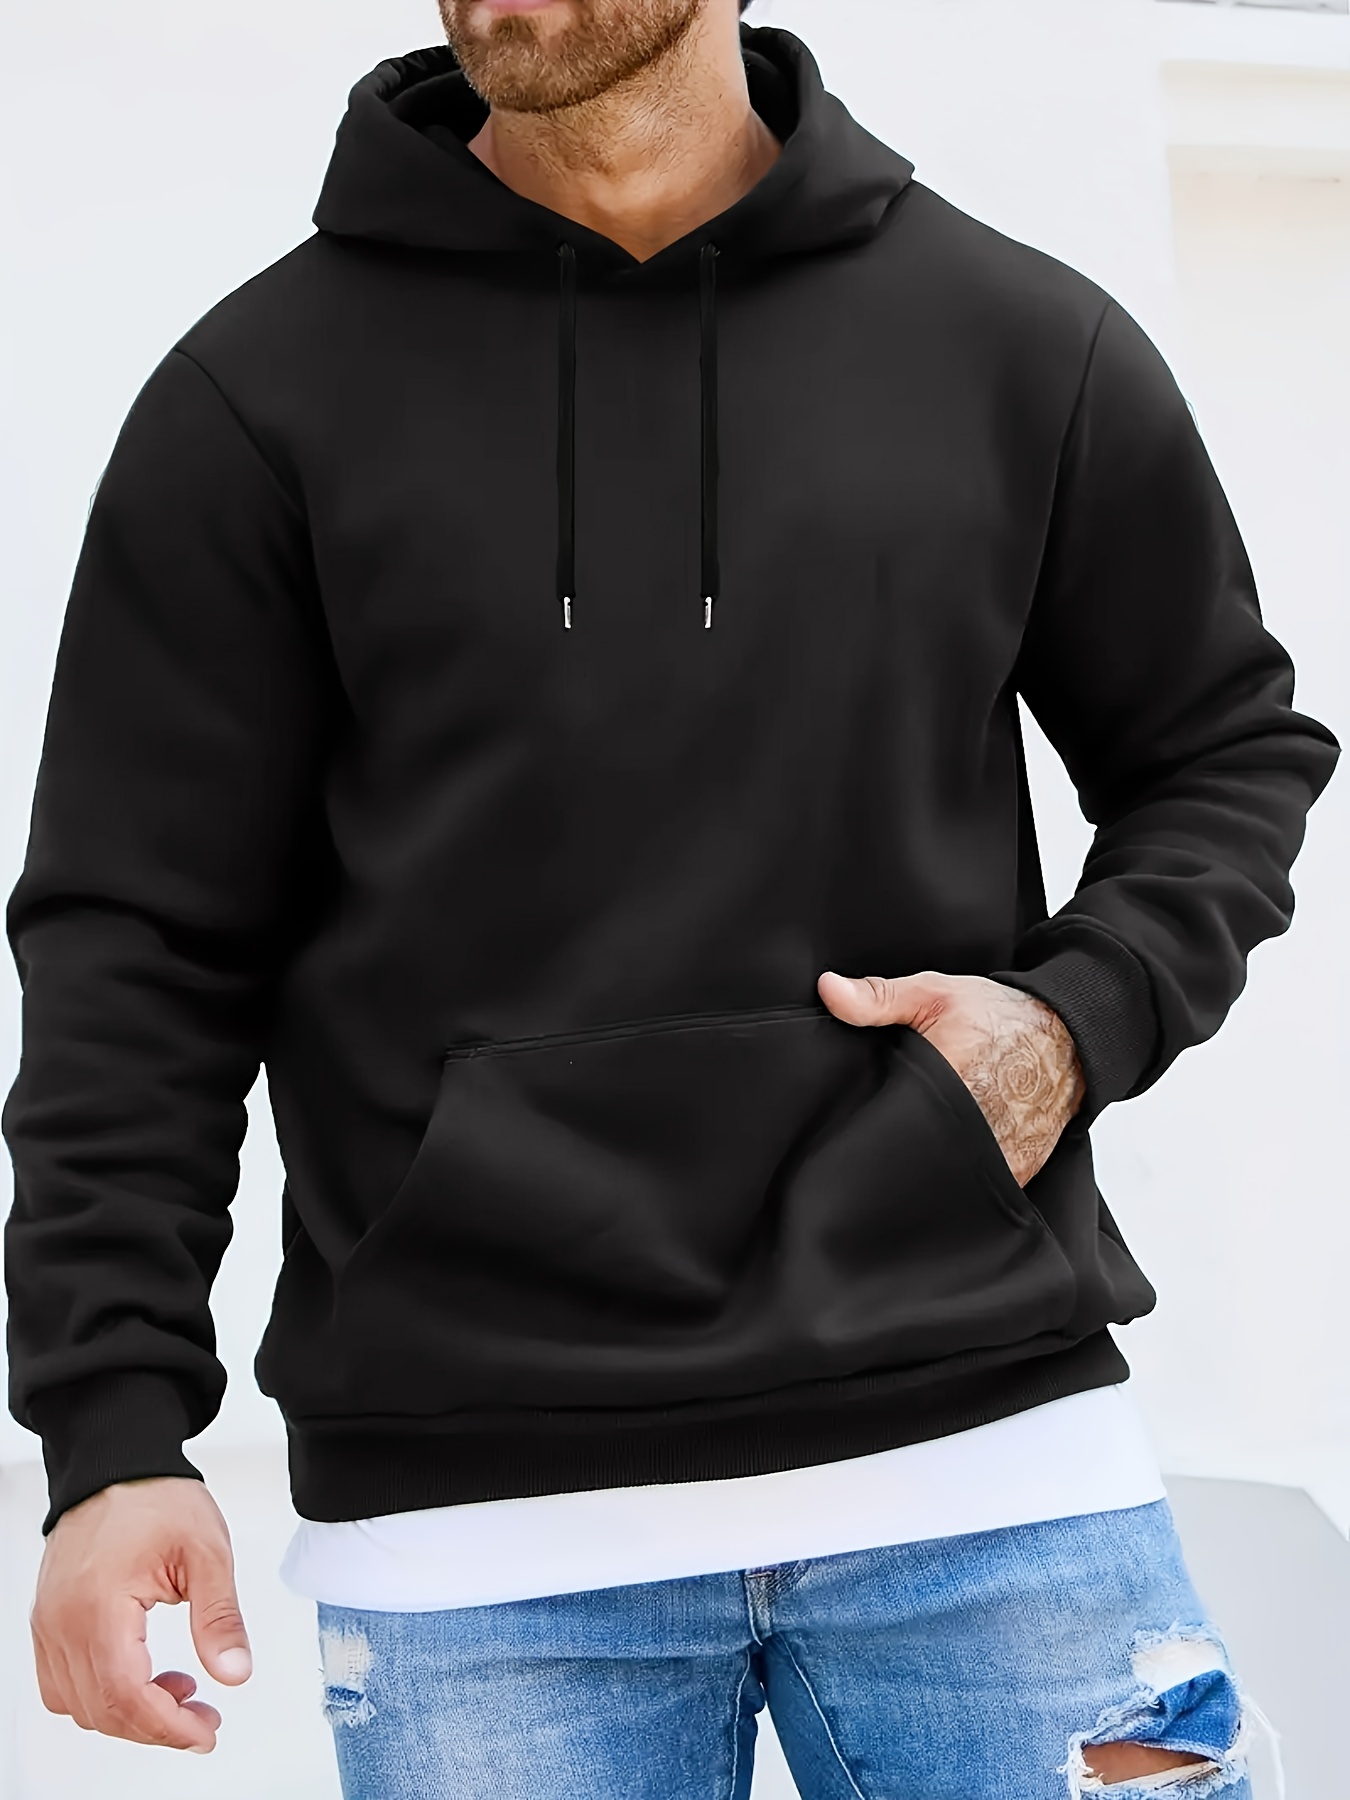 Grey Hollister Hoodie  Fall outfits men, Mens outfits, Hoodies men